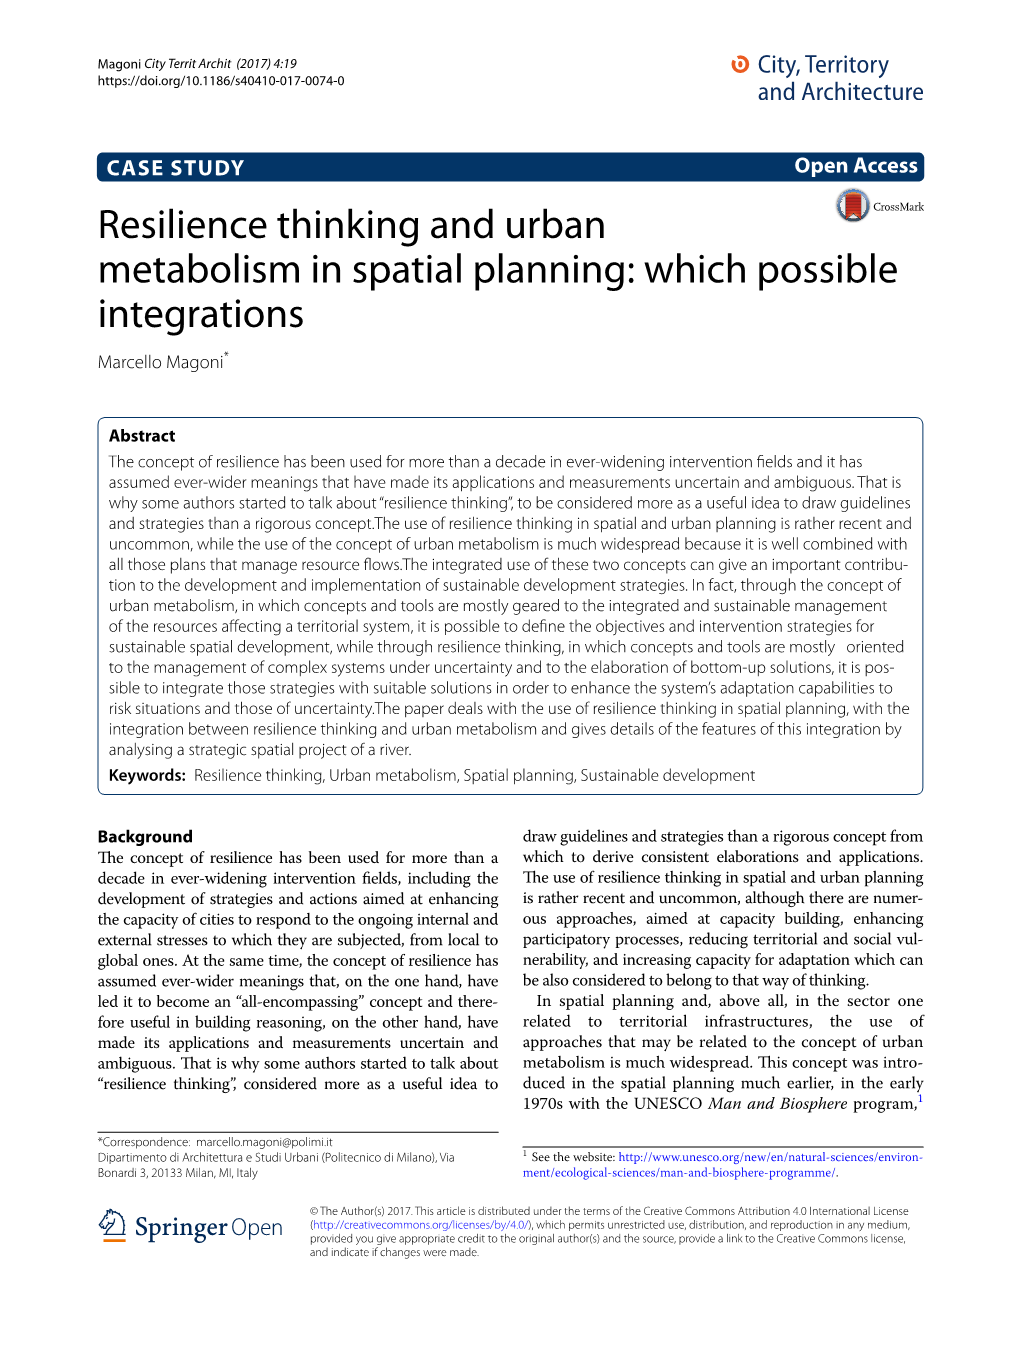 Resilience Thinking and Urban Metabolism in Spatial Planning: Which Possible Integrations Marcello Magoni*